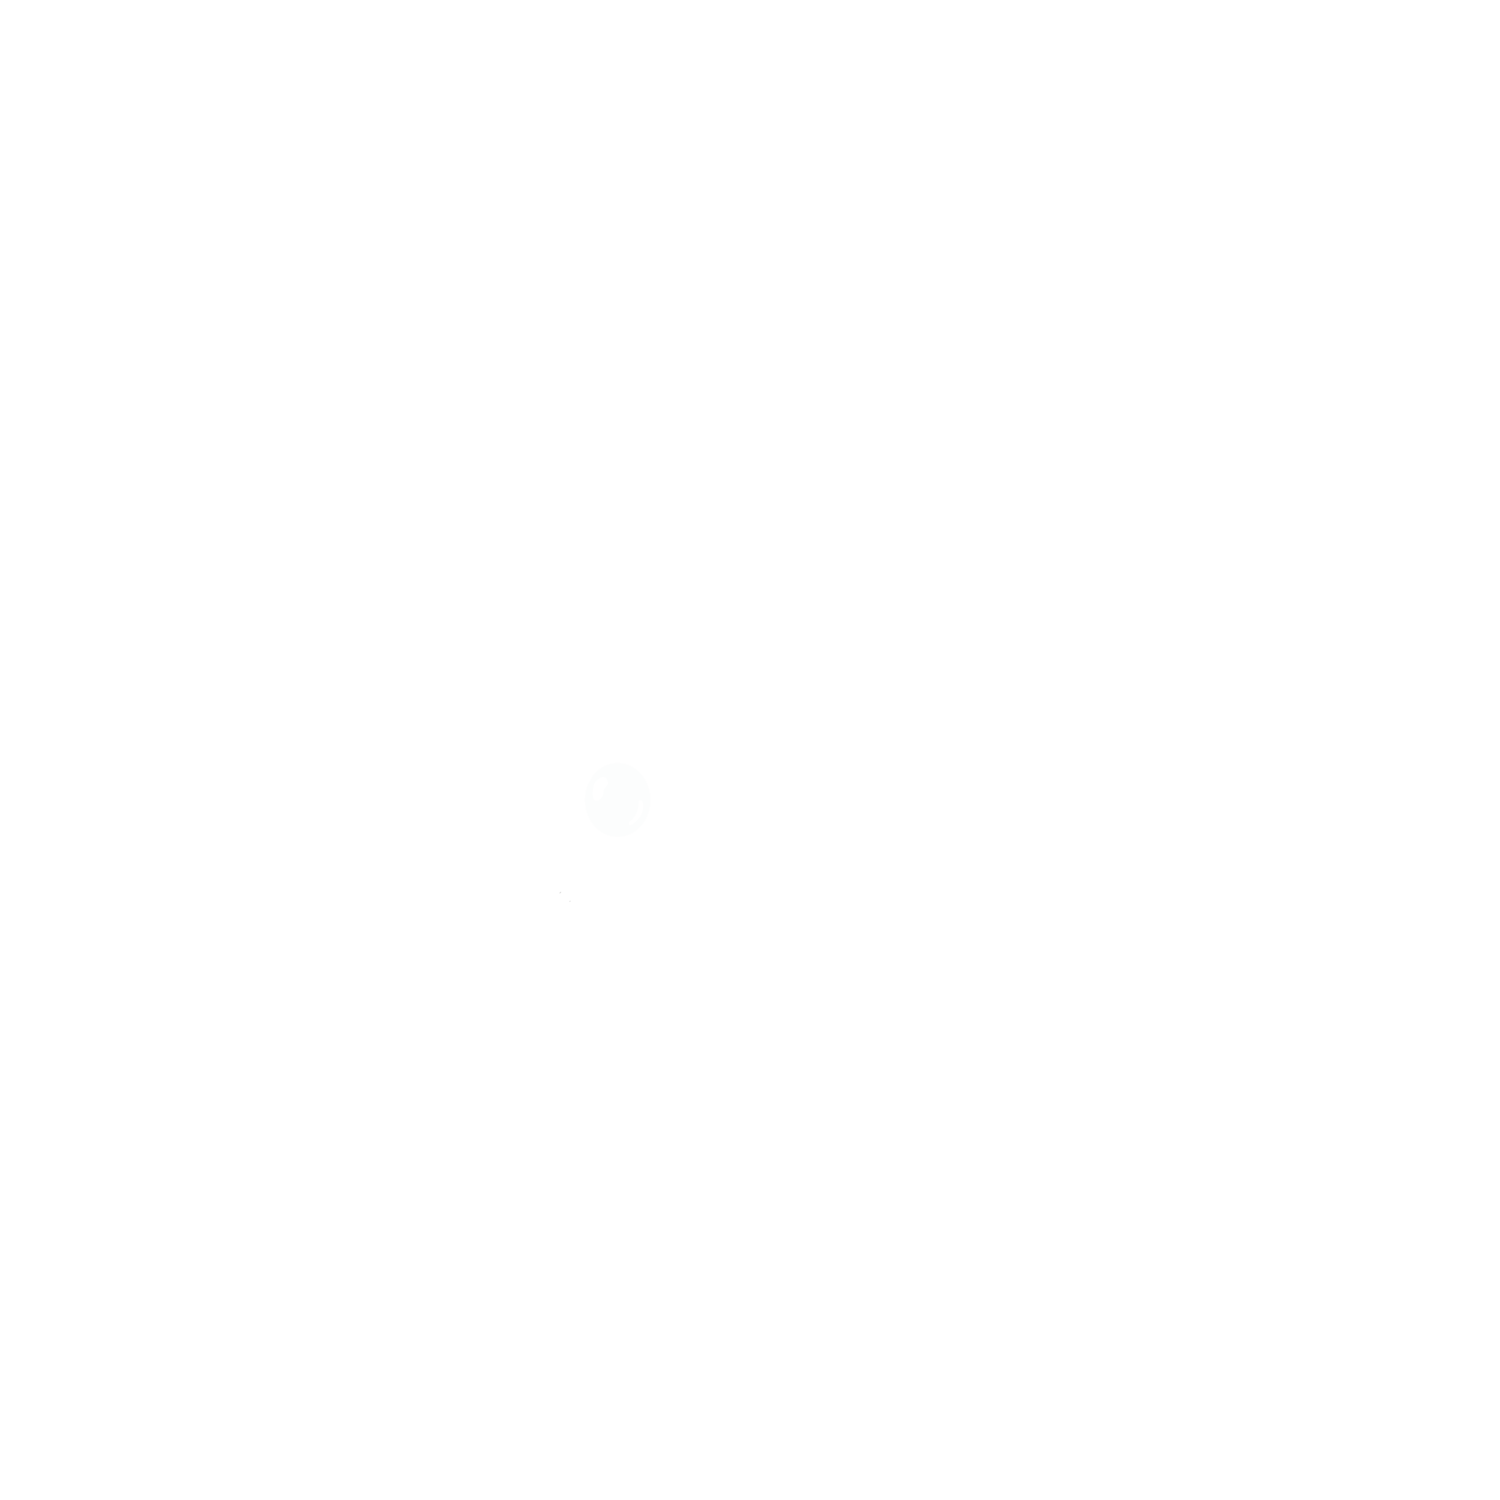 Troy E. Vail Photography